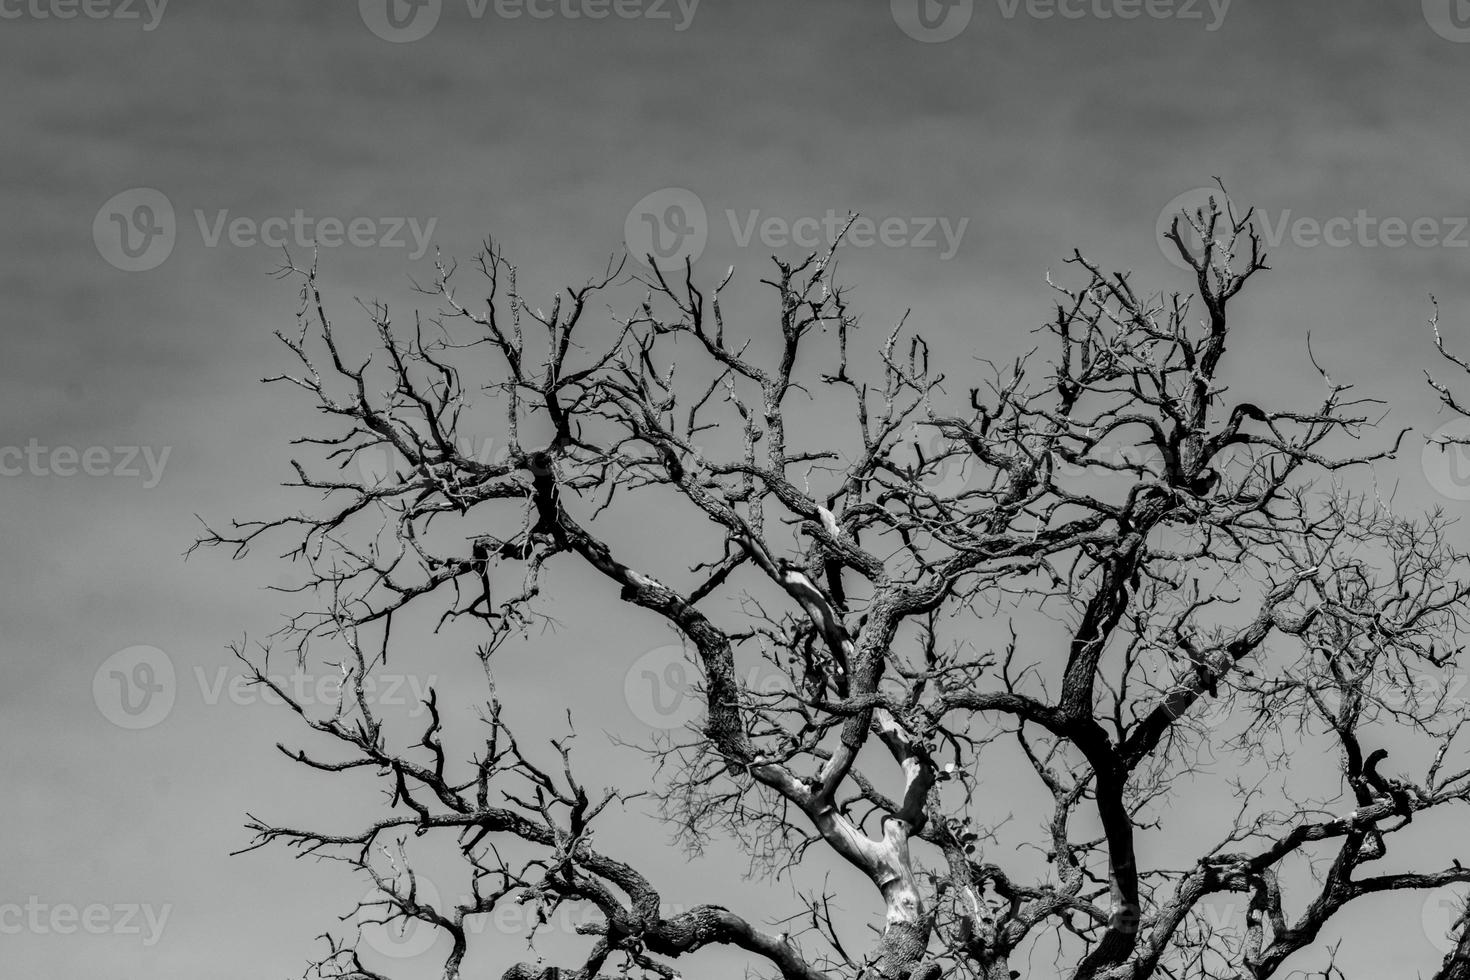 Art picture of dead tree with branches. Death, sad, lament, hopeless, and despair background. Drought of the world from the global warming crisis. Natural death. Black and white photo of dead tree.